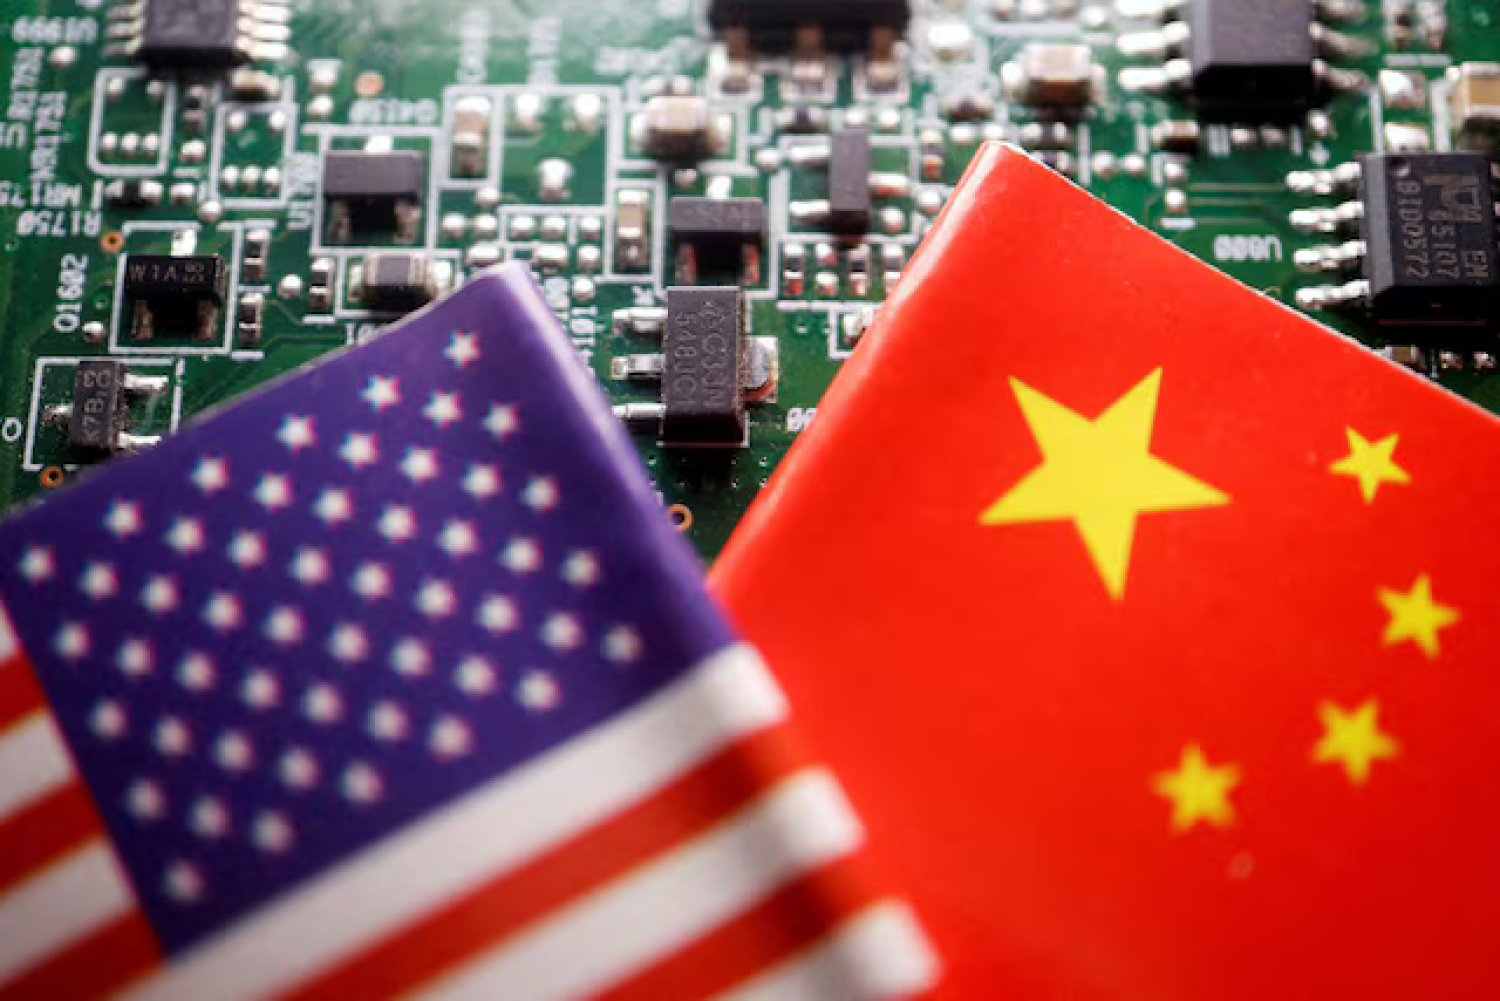 Flags of China and US are displayed on a printed circuit board with semiconductor chips, in this illustration picture taken February 17, 2023. REUTERS/Florence Lo/Illustration/File Photo Purchase Licensing Rights